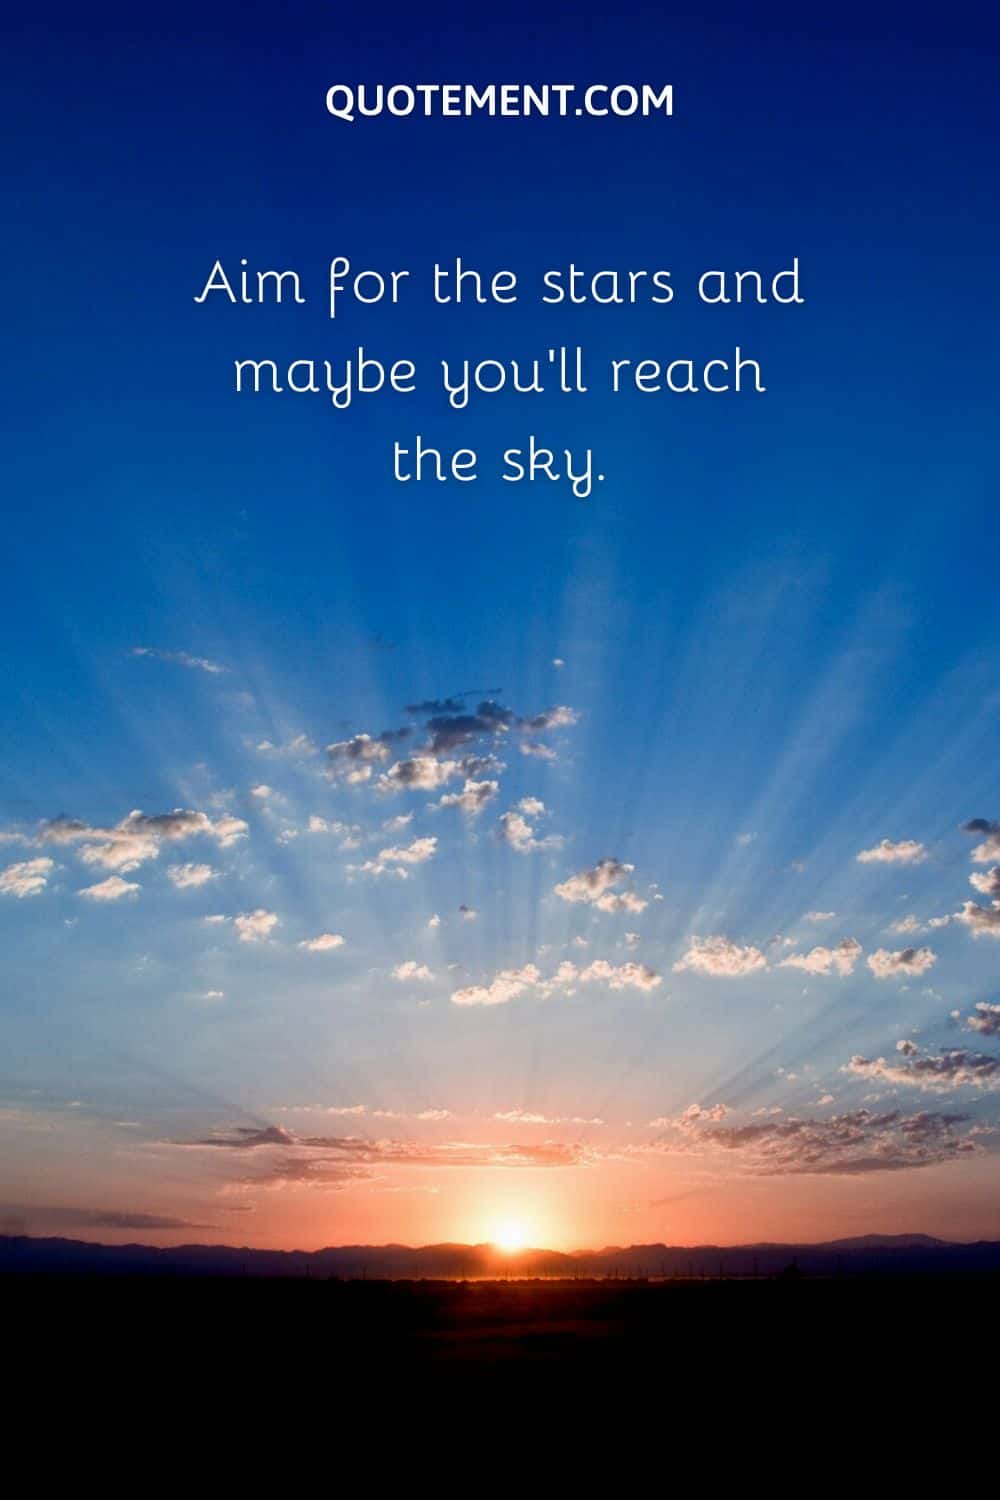 Aim for the stars and maybe you’ll reach the sky.